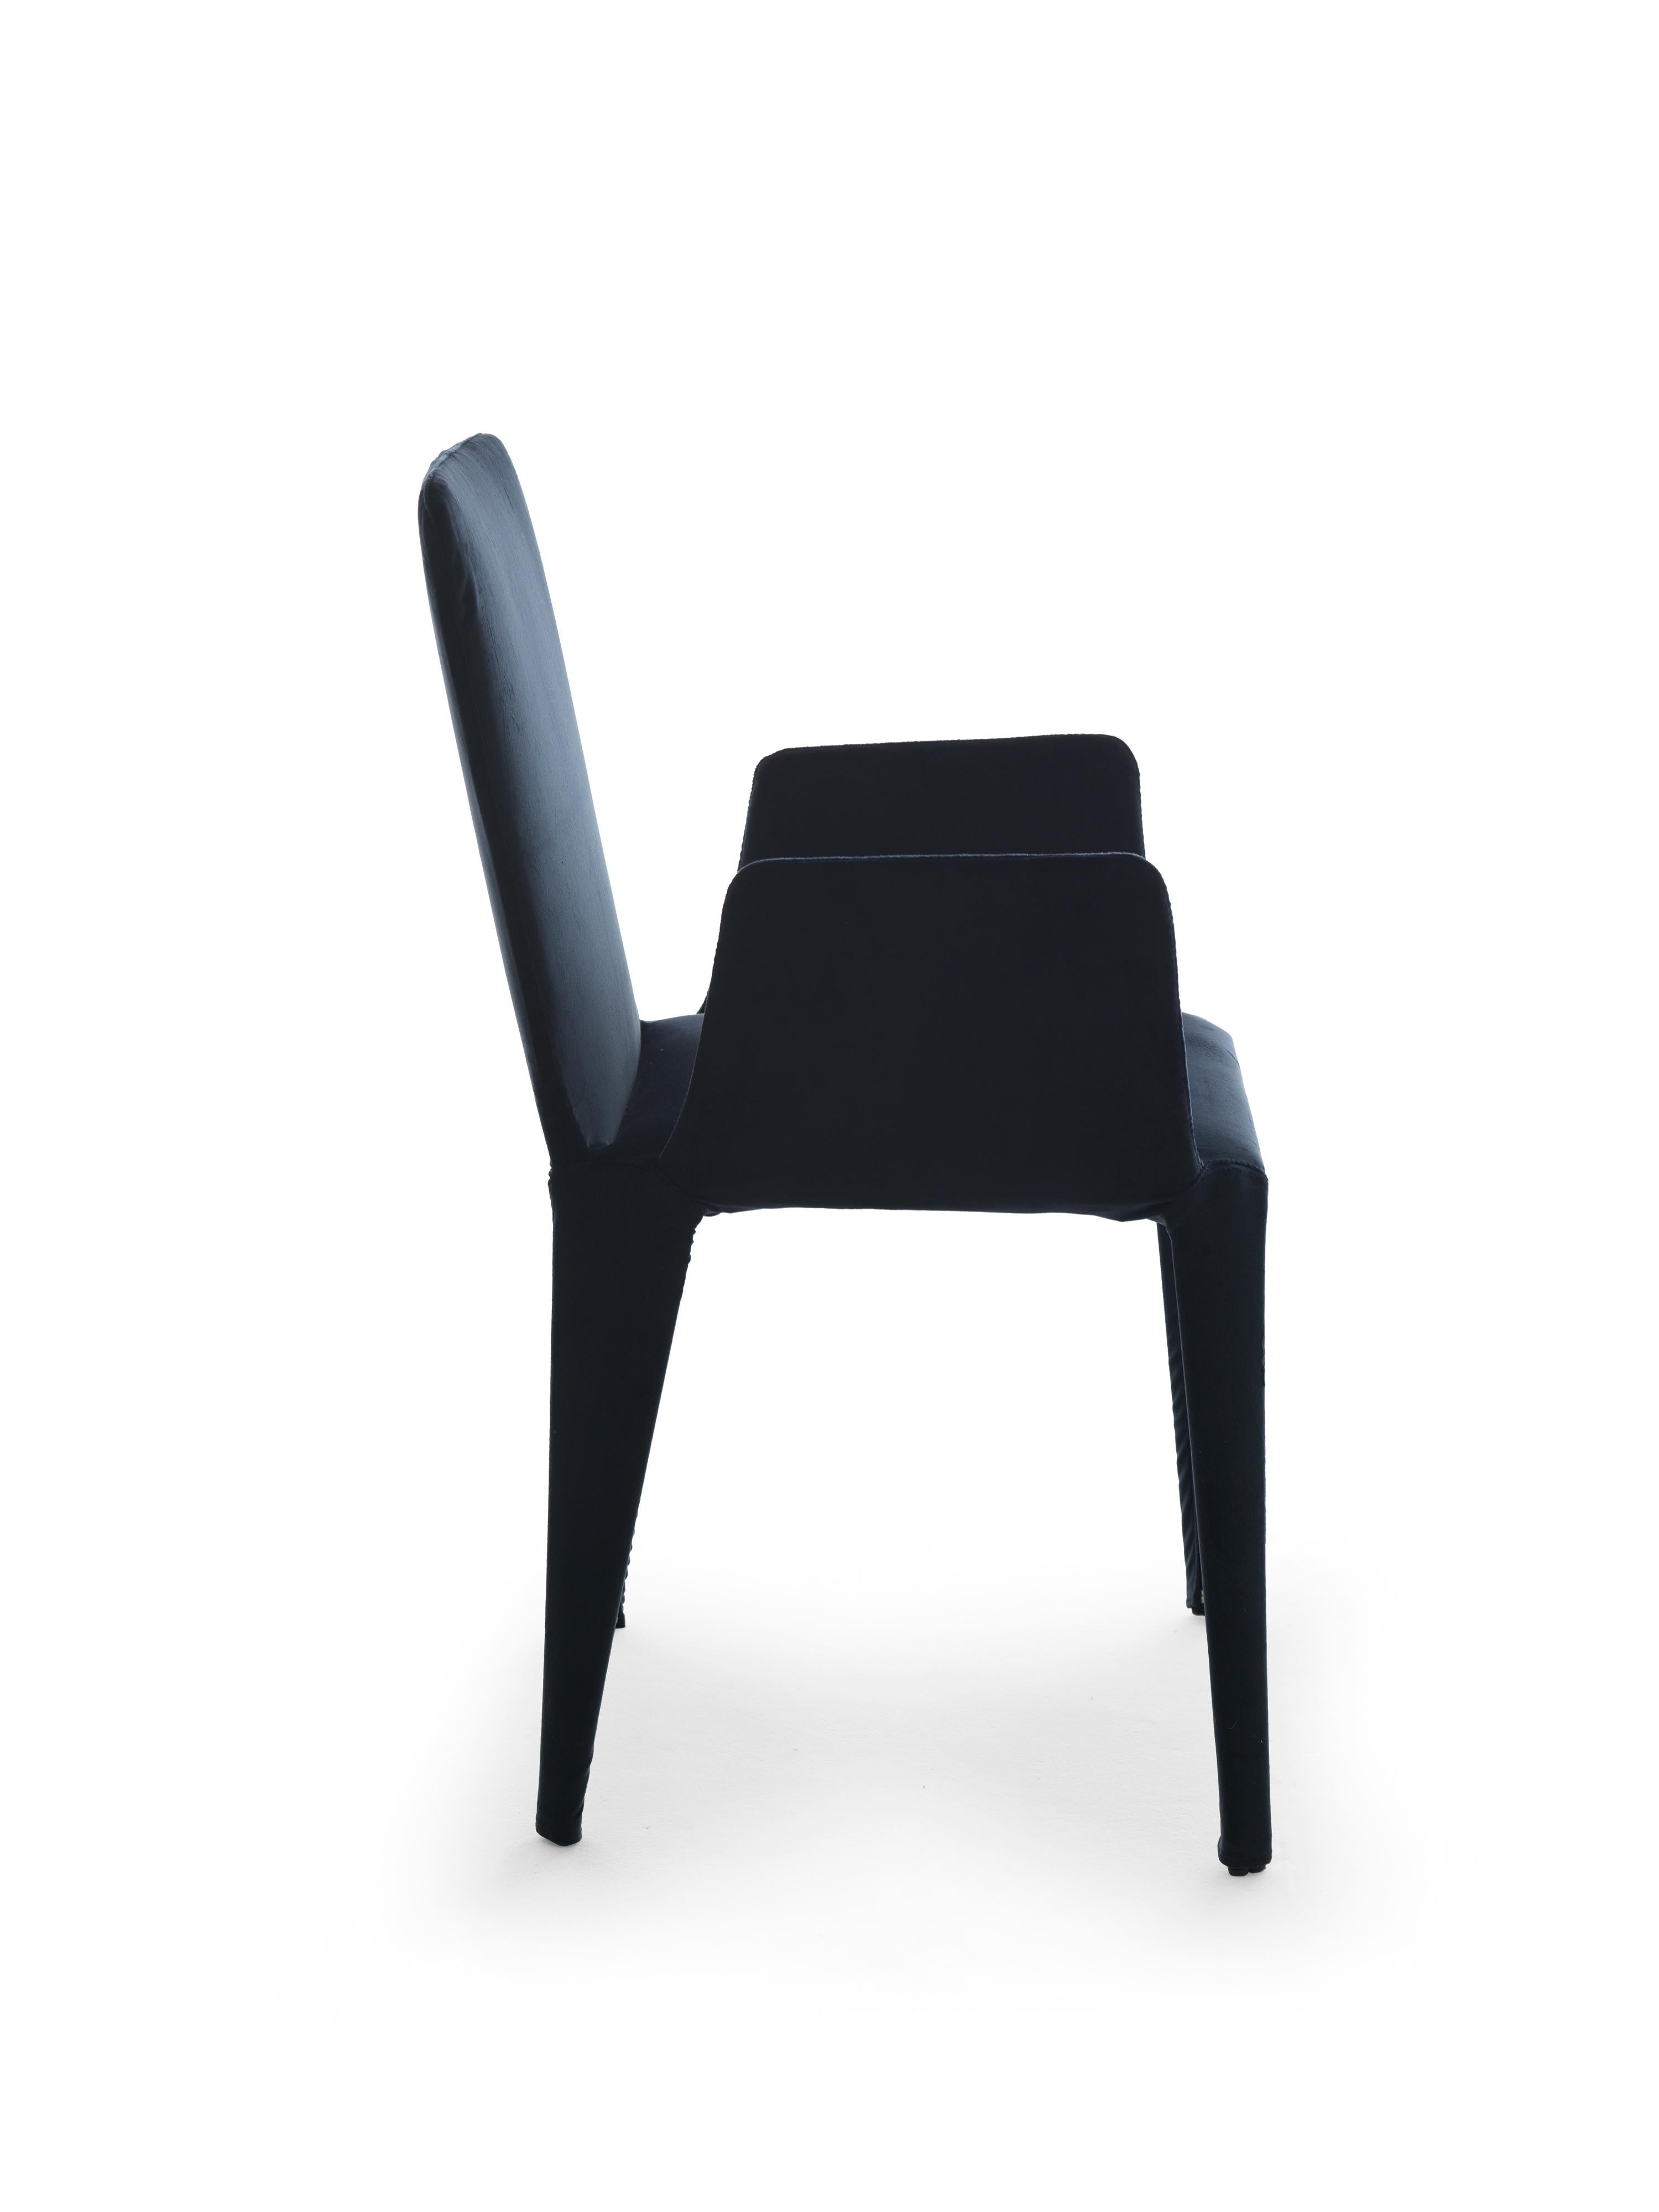 Italian 21st Century Modern Textile Chair With Removable Cover  For Sale